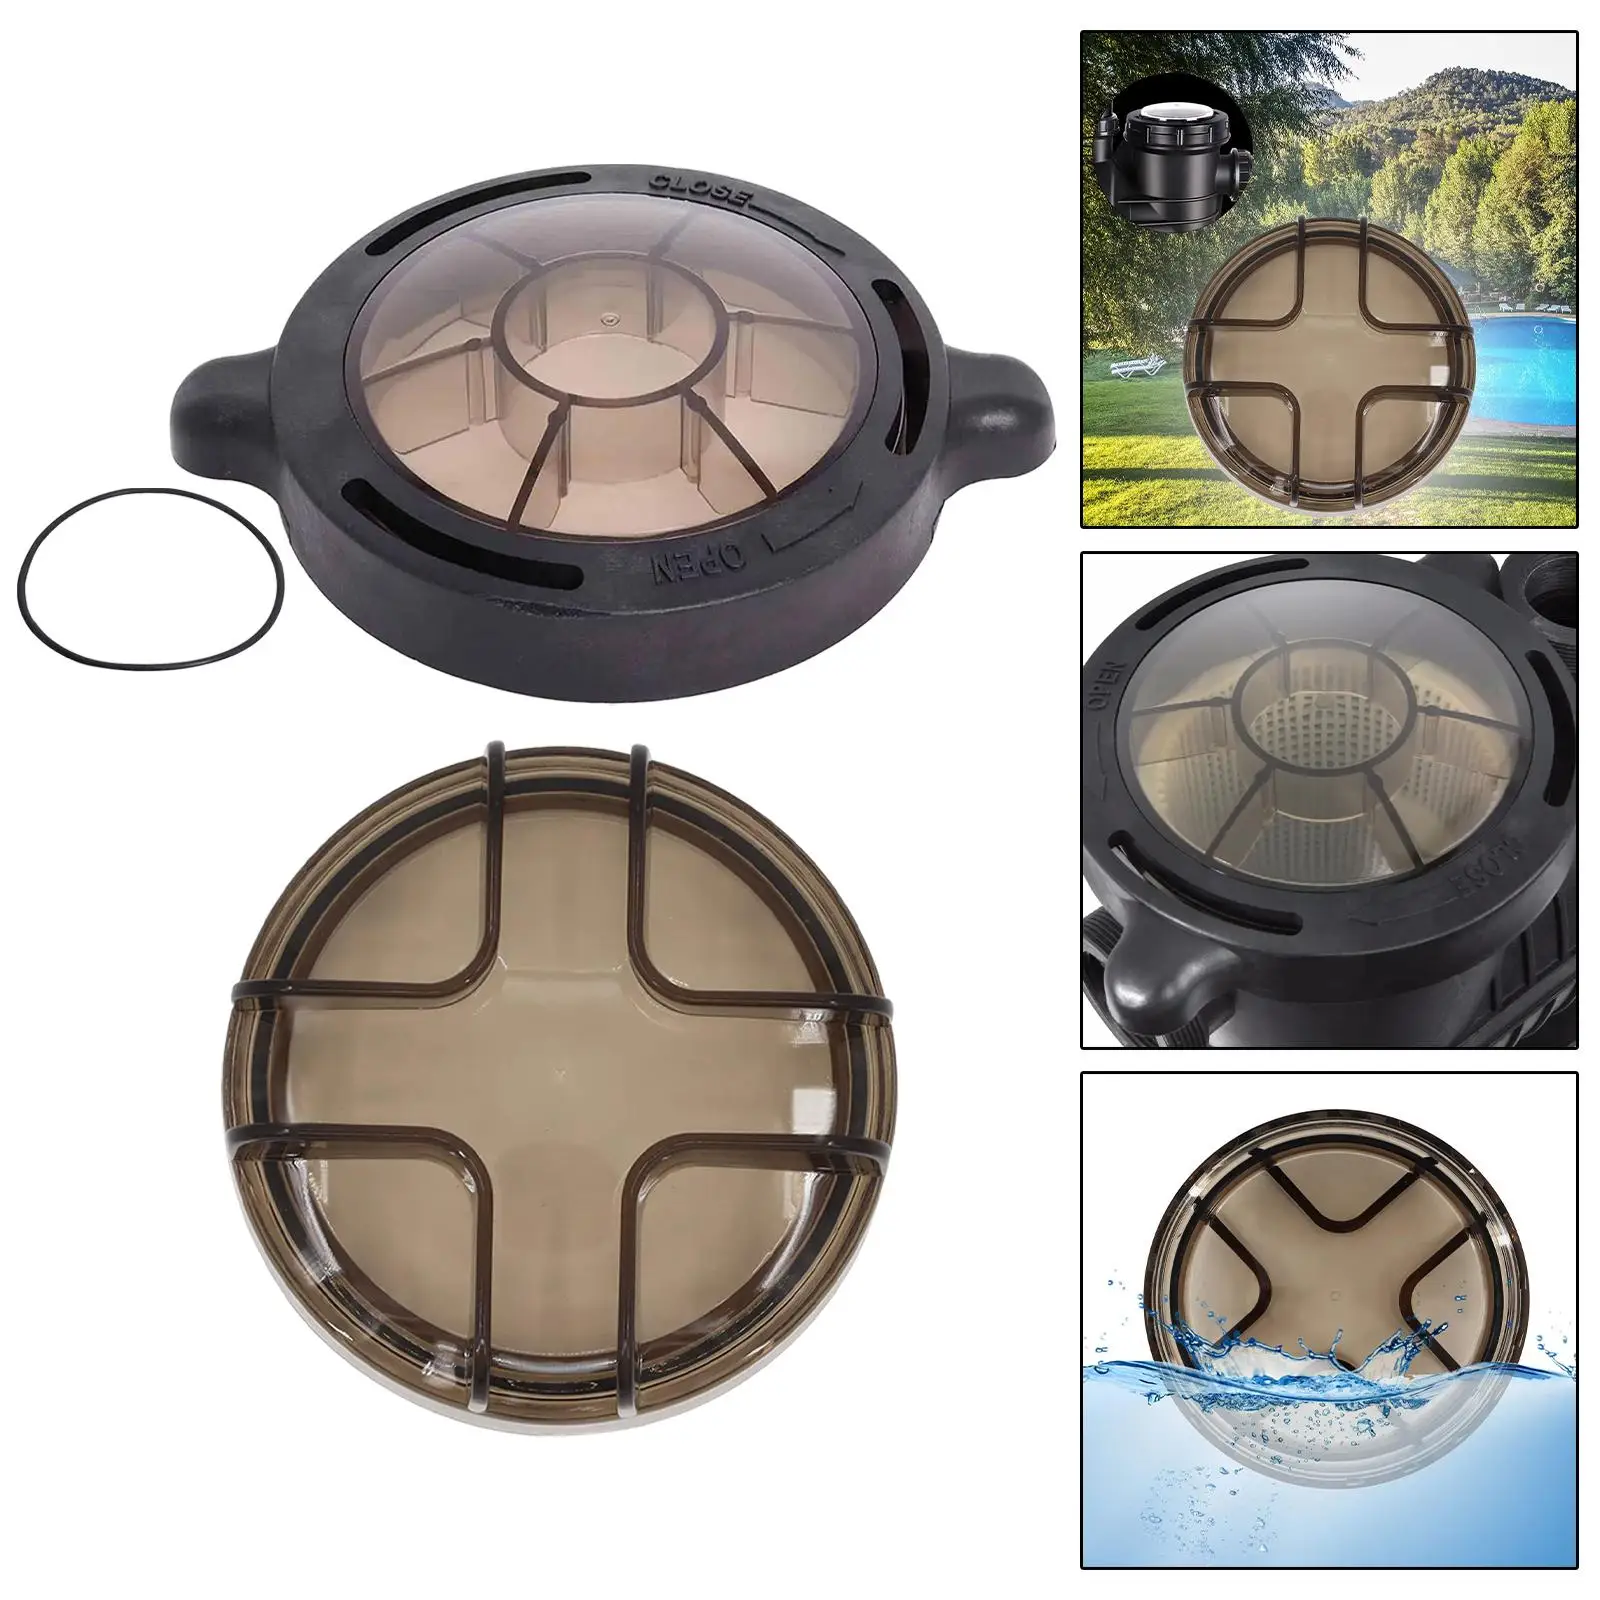 Threaded Strainer Lid Cover Supplies above Ground Swimming Pool Effective Thread Strainer Cover replacement 72743 72744